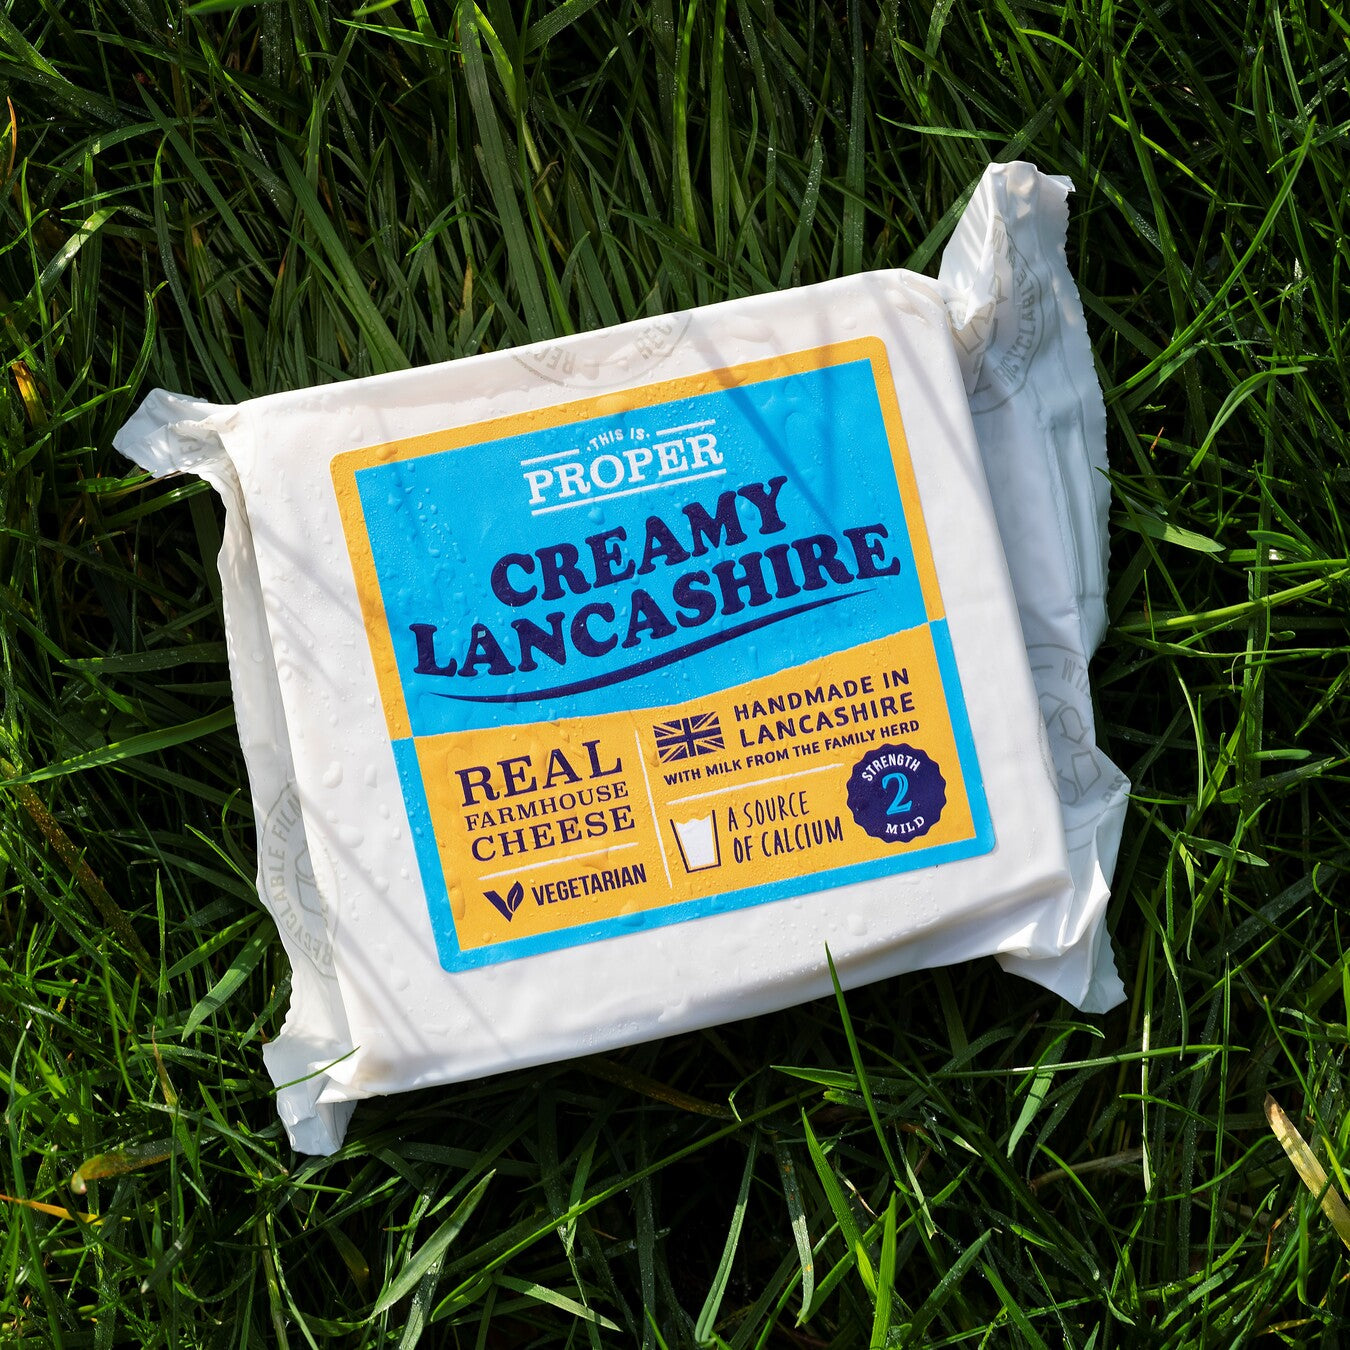 This is Proper Creamy Lancashire cheese packet resting outside on the grass.